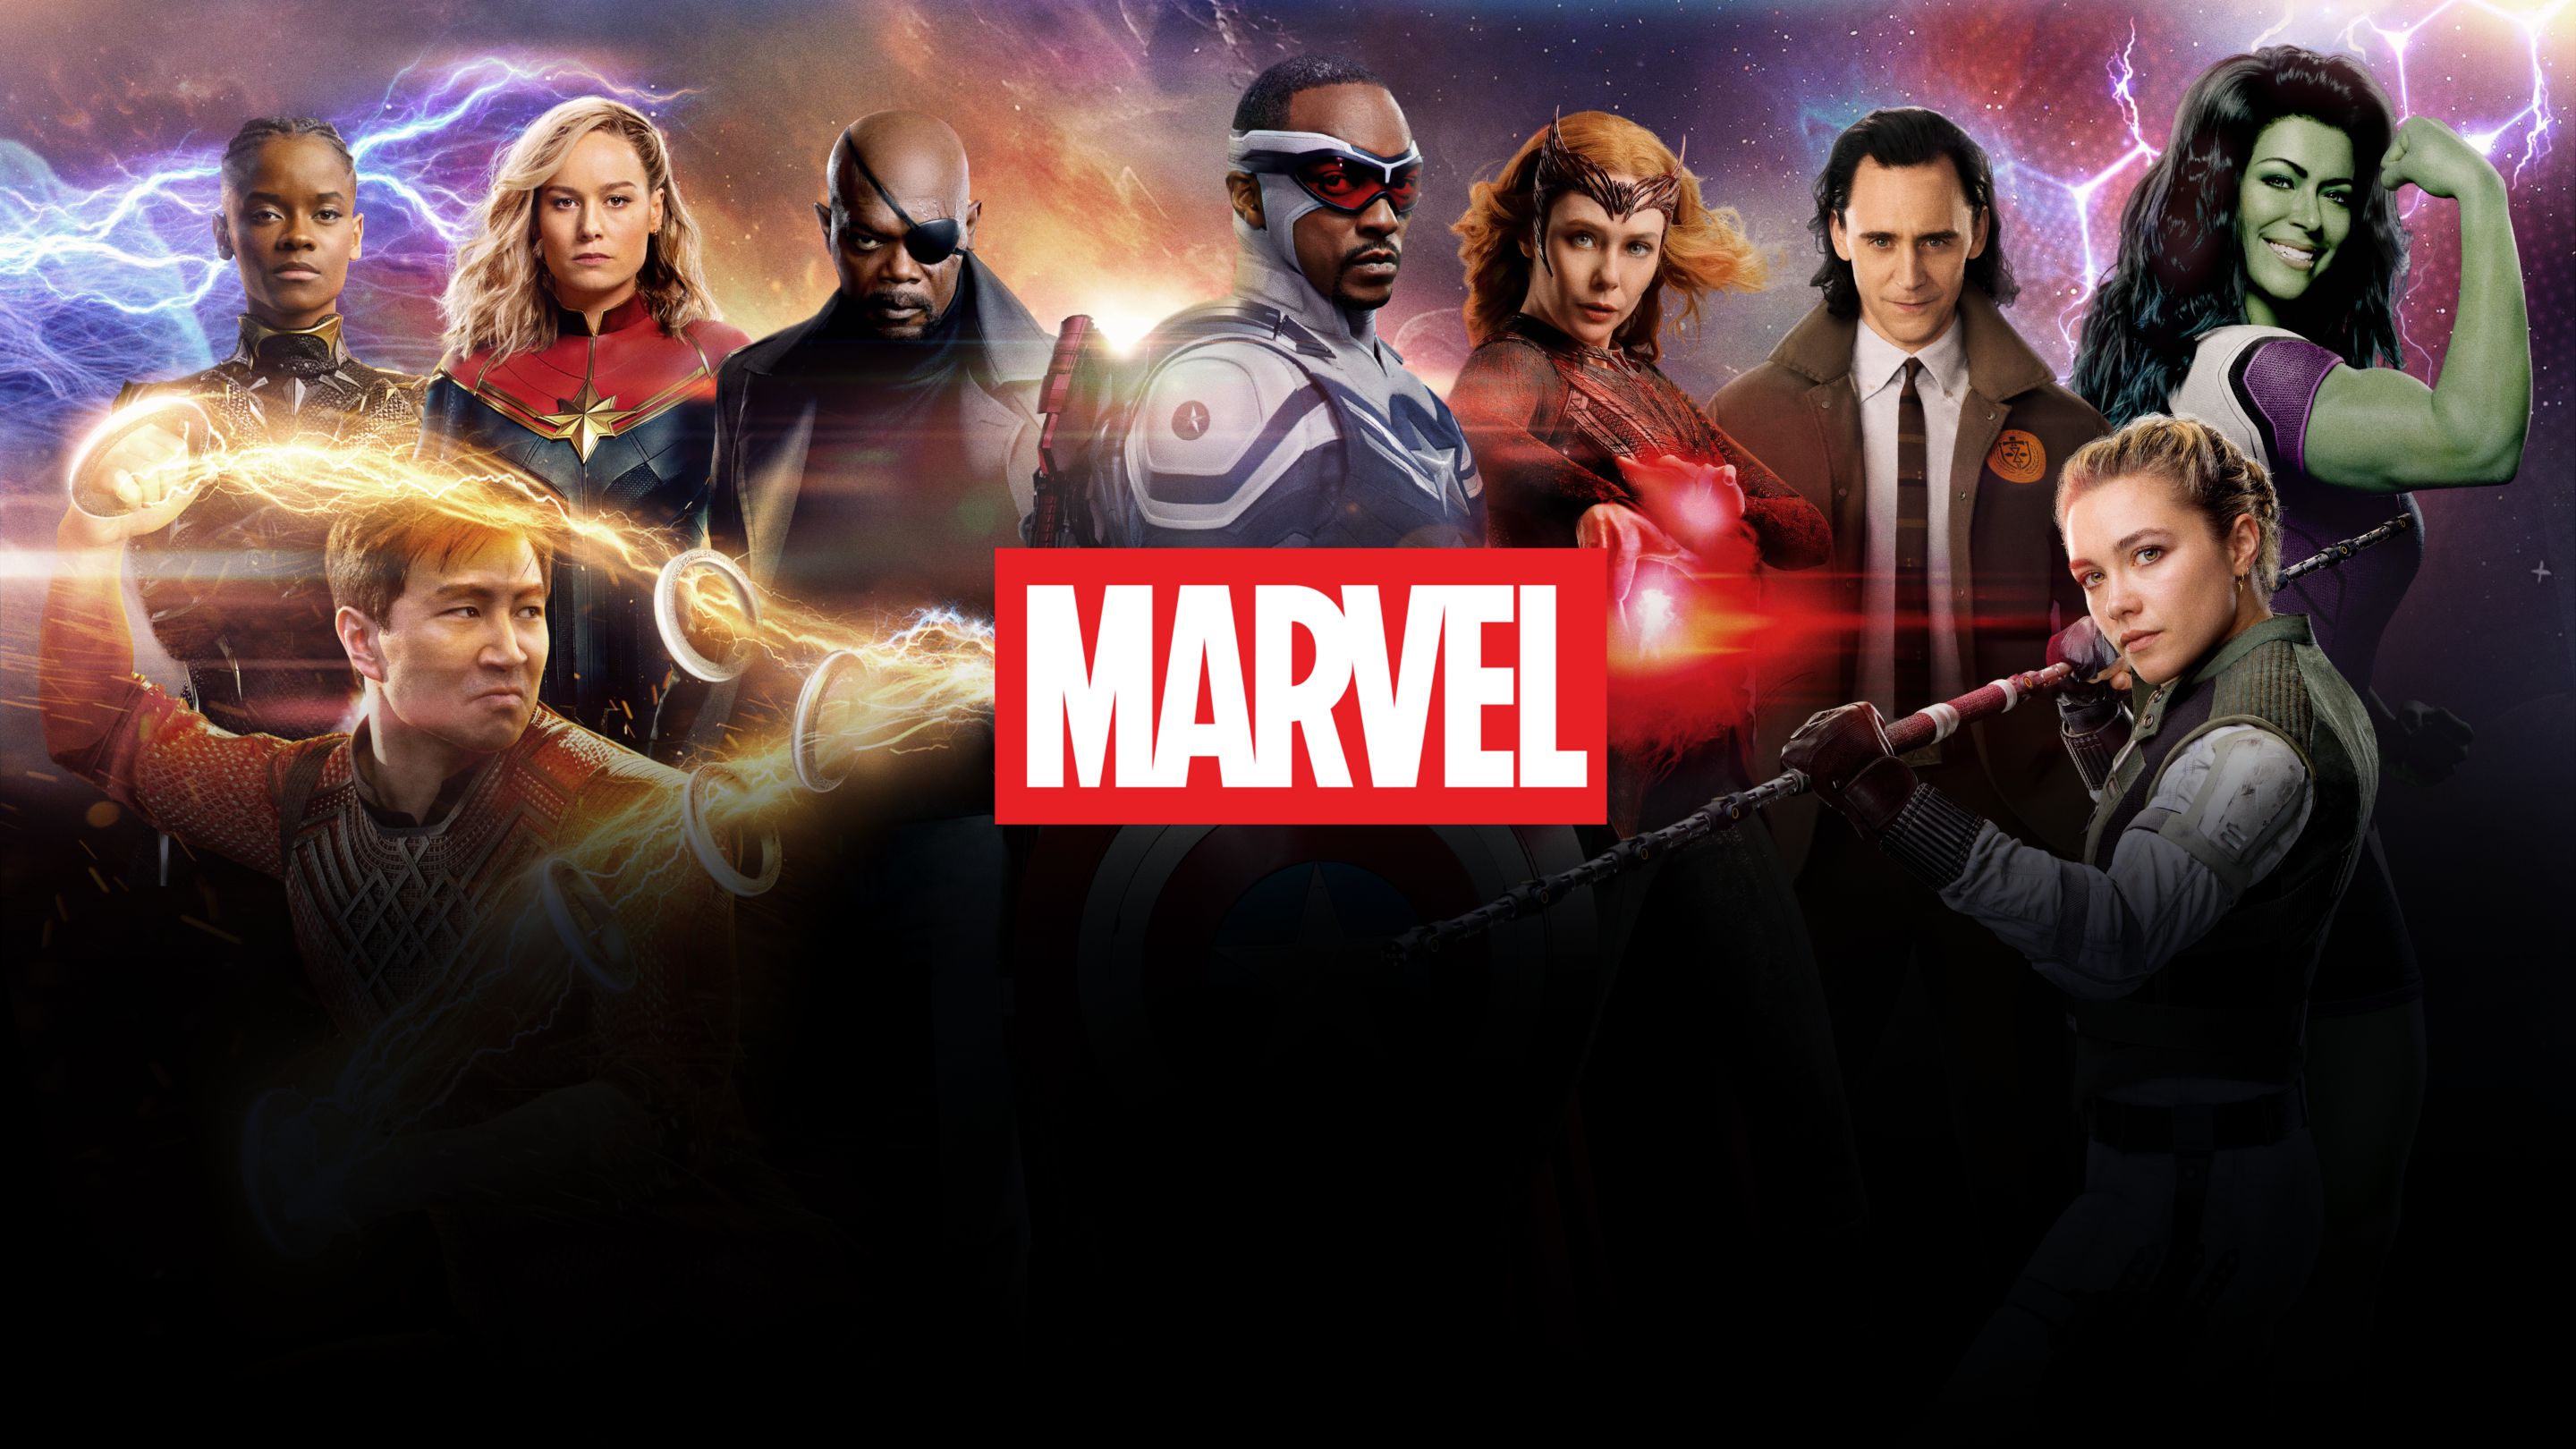 Marvel movies and shows